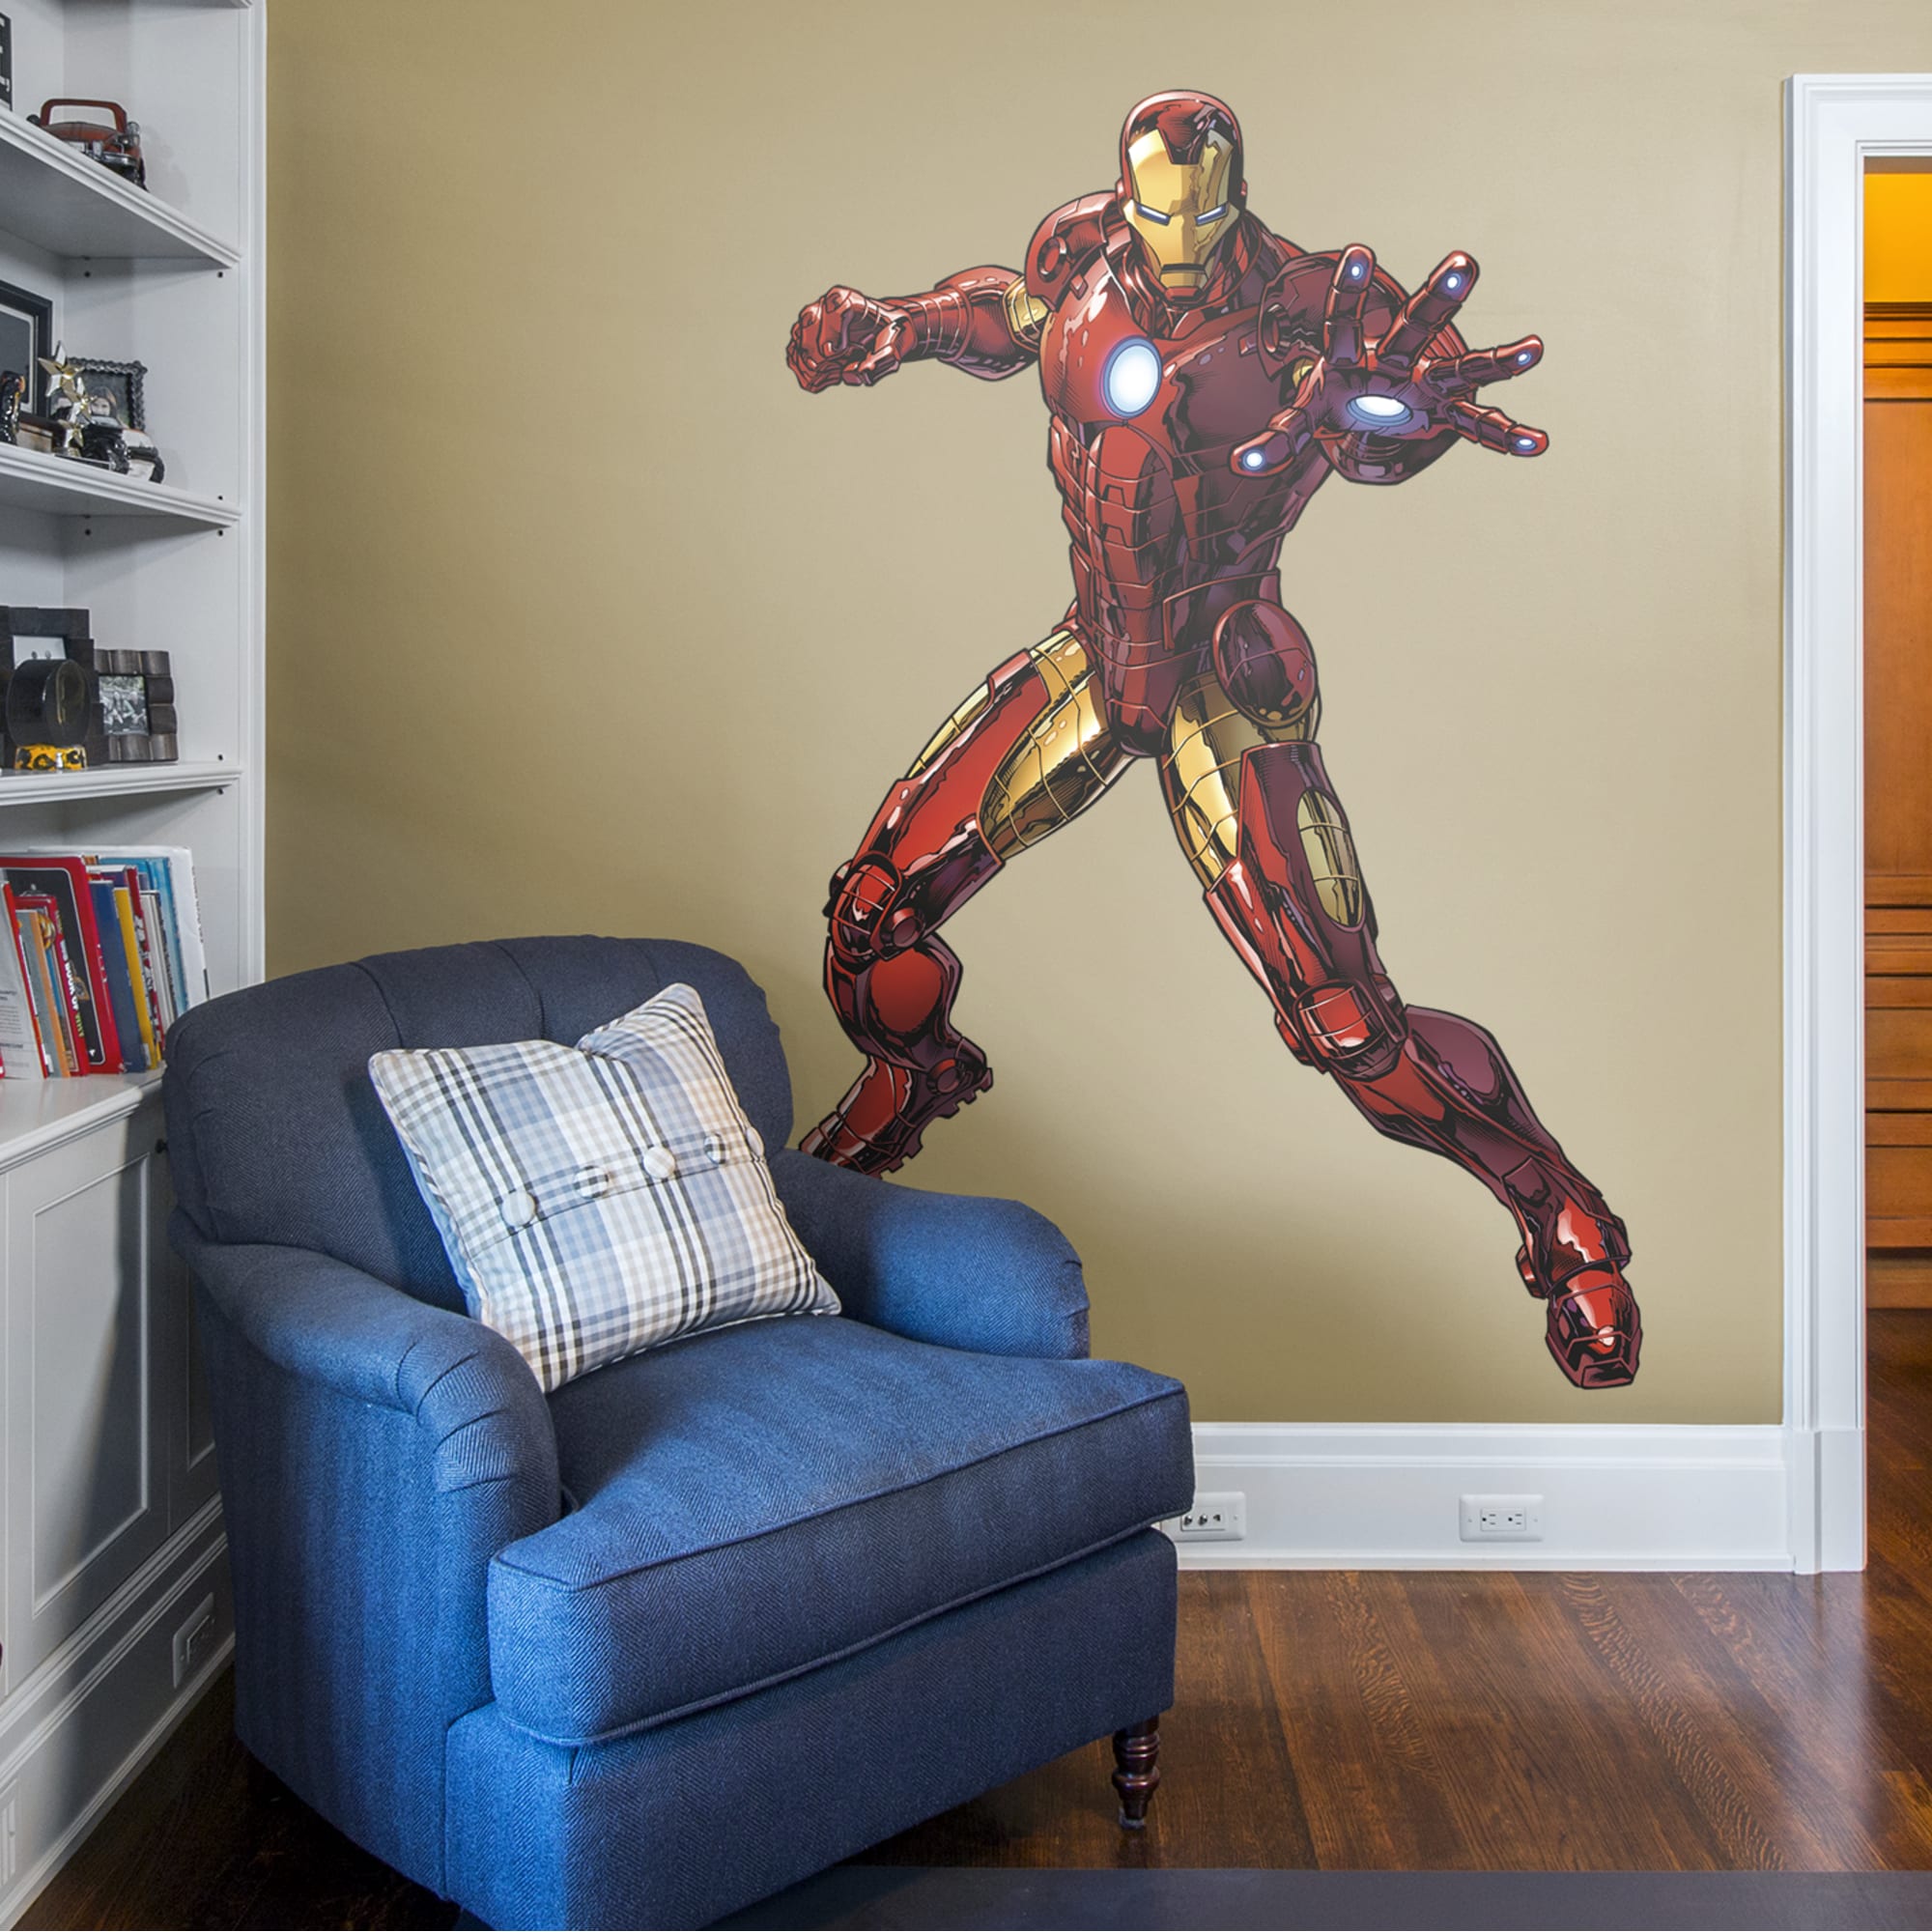 Iron Man: Avengers Assemble - Officially Licensed Removable Wall Decal 51.0"W x 77.0"H by Fathead | Vinyl